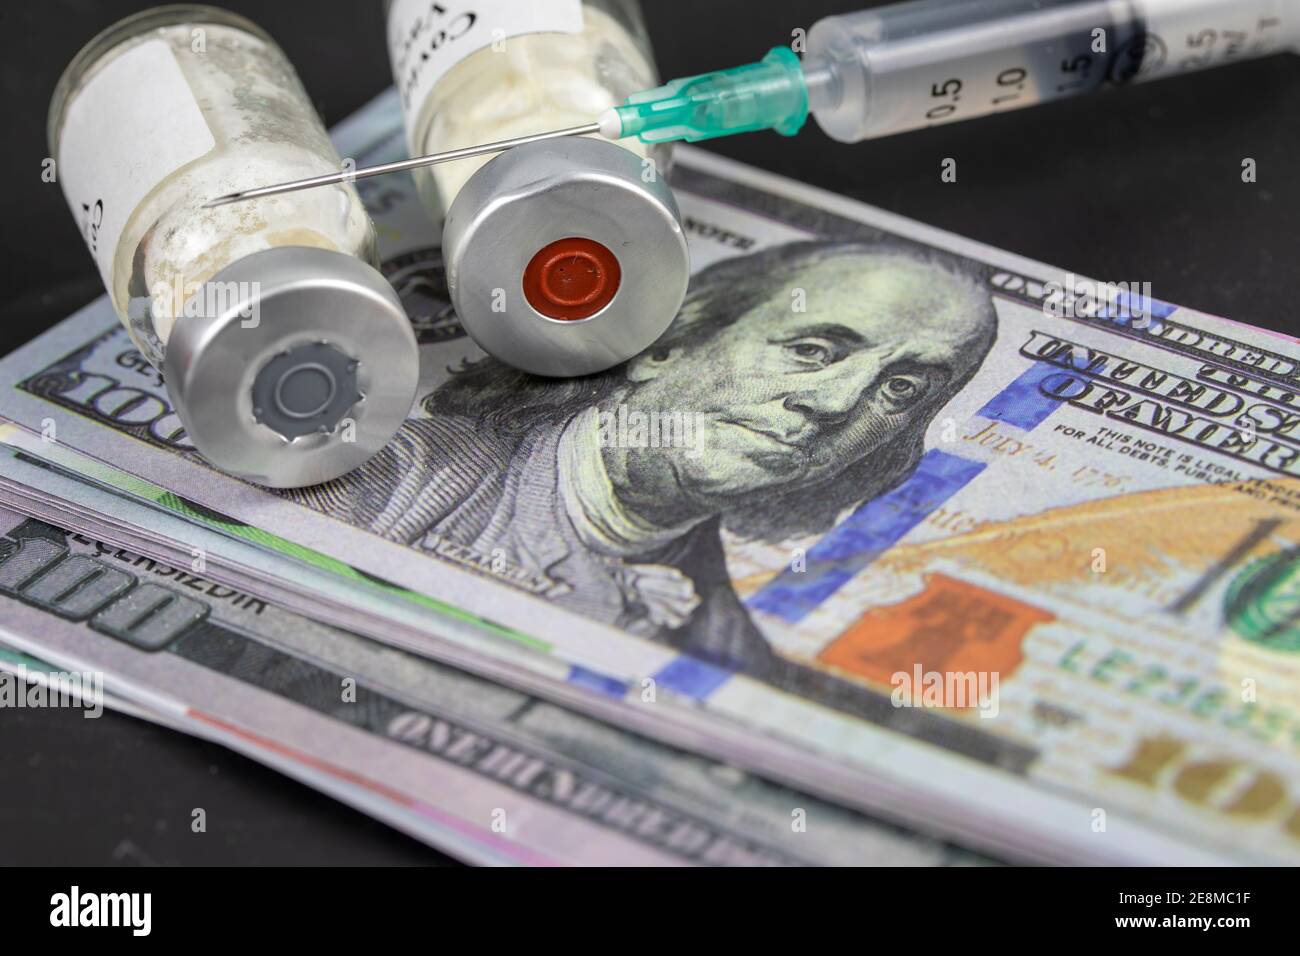 Pandemic Concept and money ( dollar) to Vaccinate. Vaccine Bottle with Syringe for Covid-19 Stock Photo